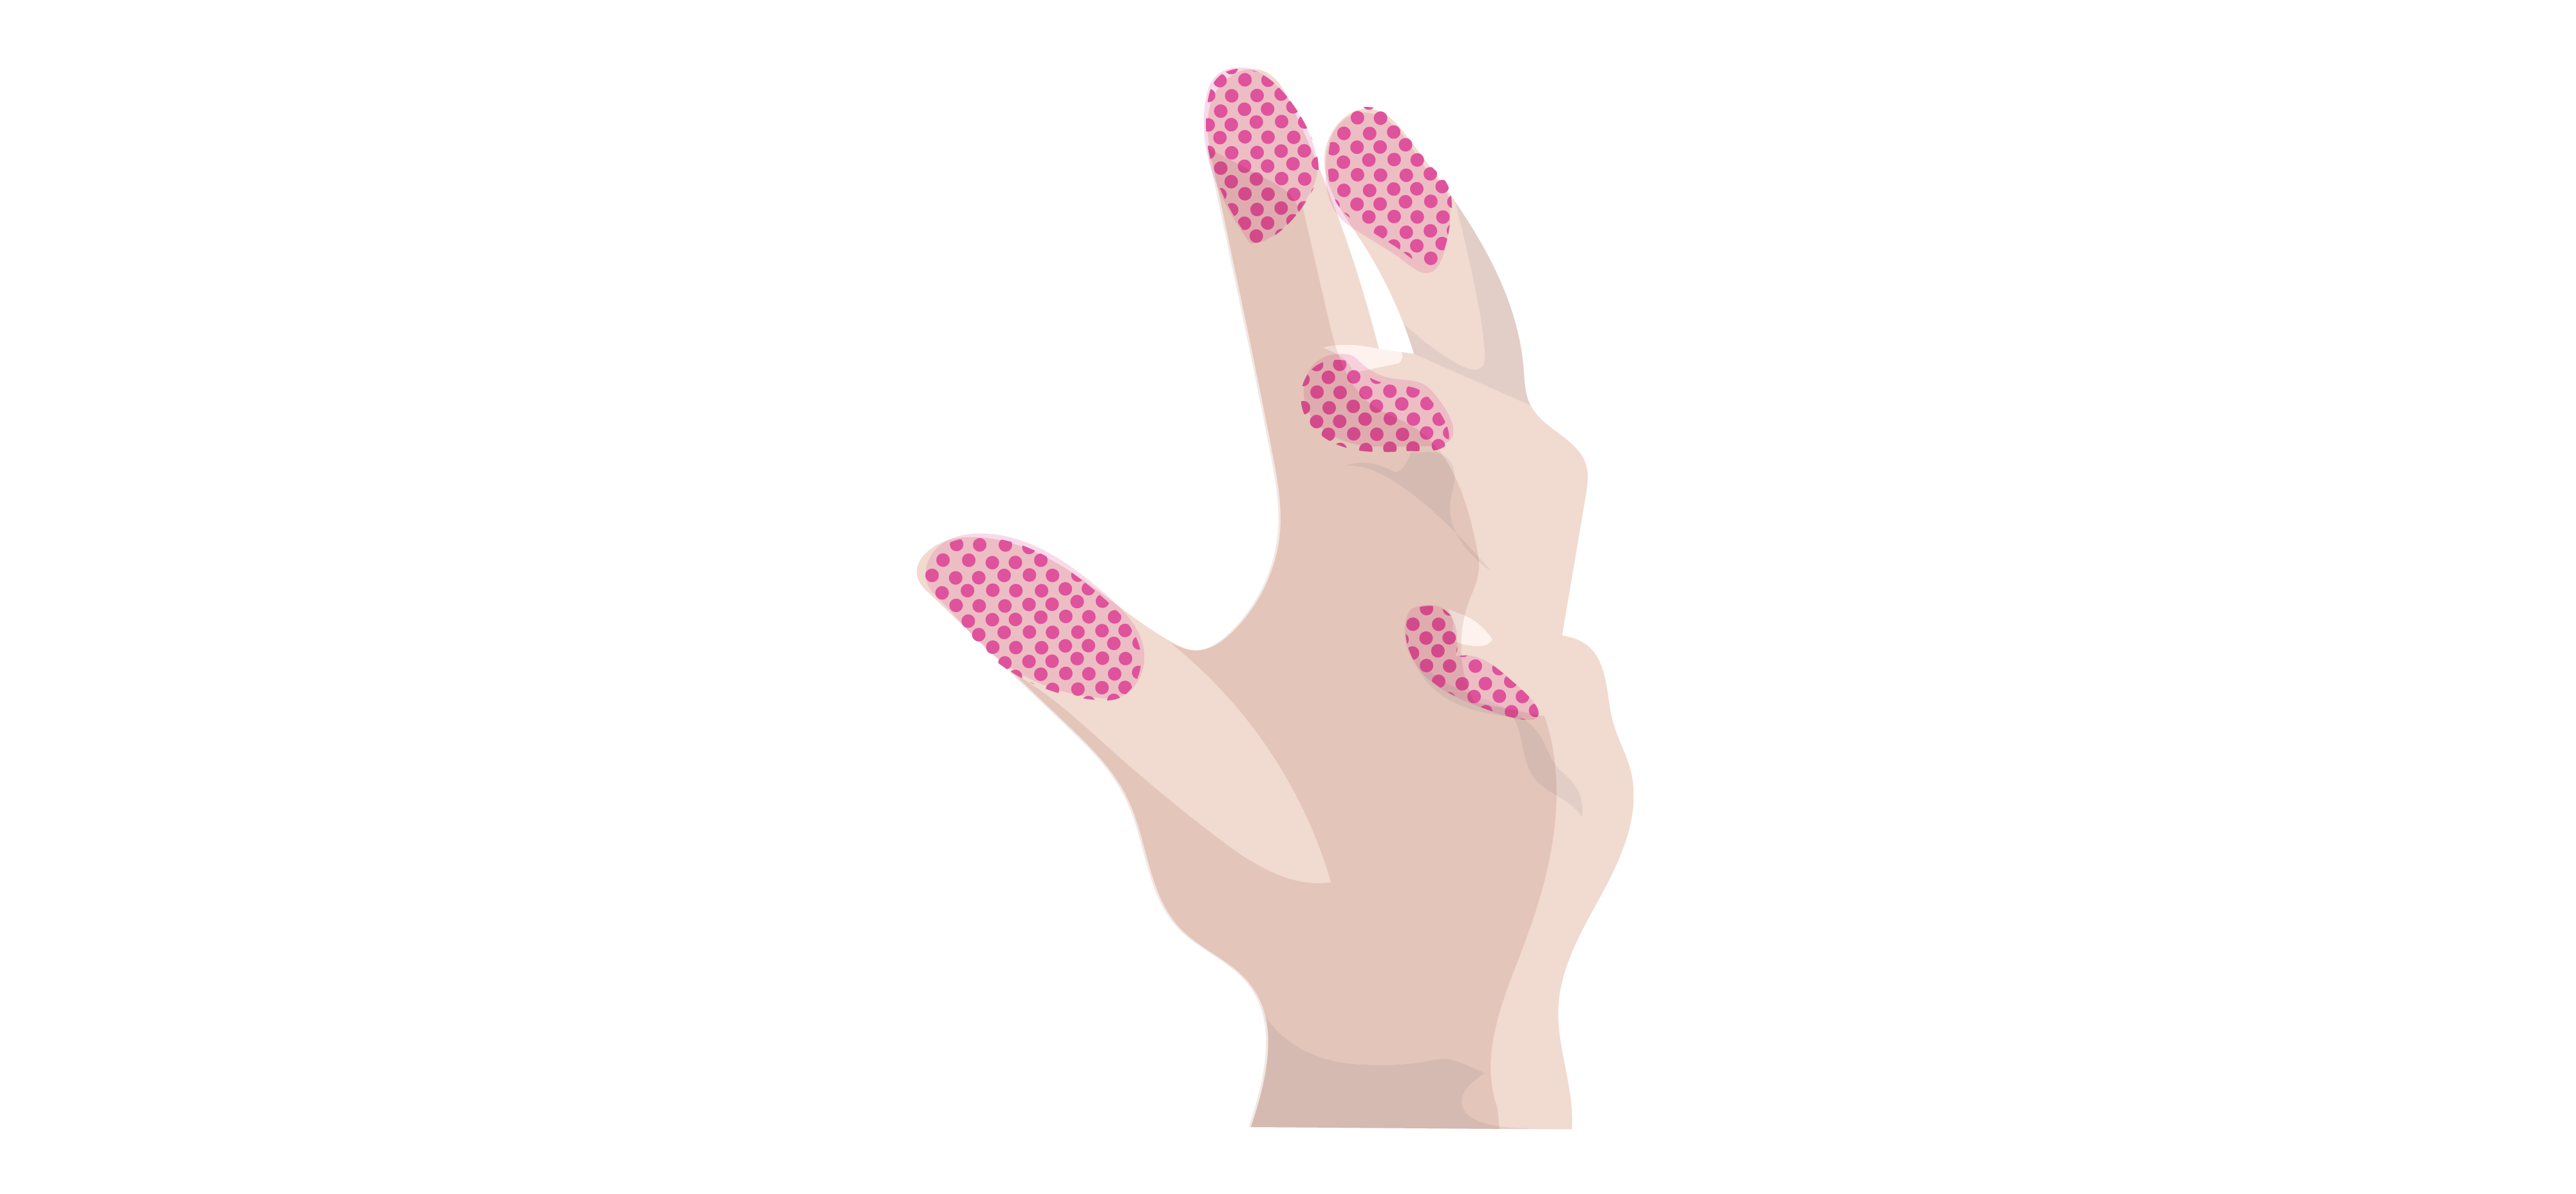 Left hand with fingertips highlighted in pink to show mechanoreceptors.